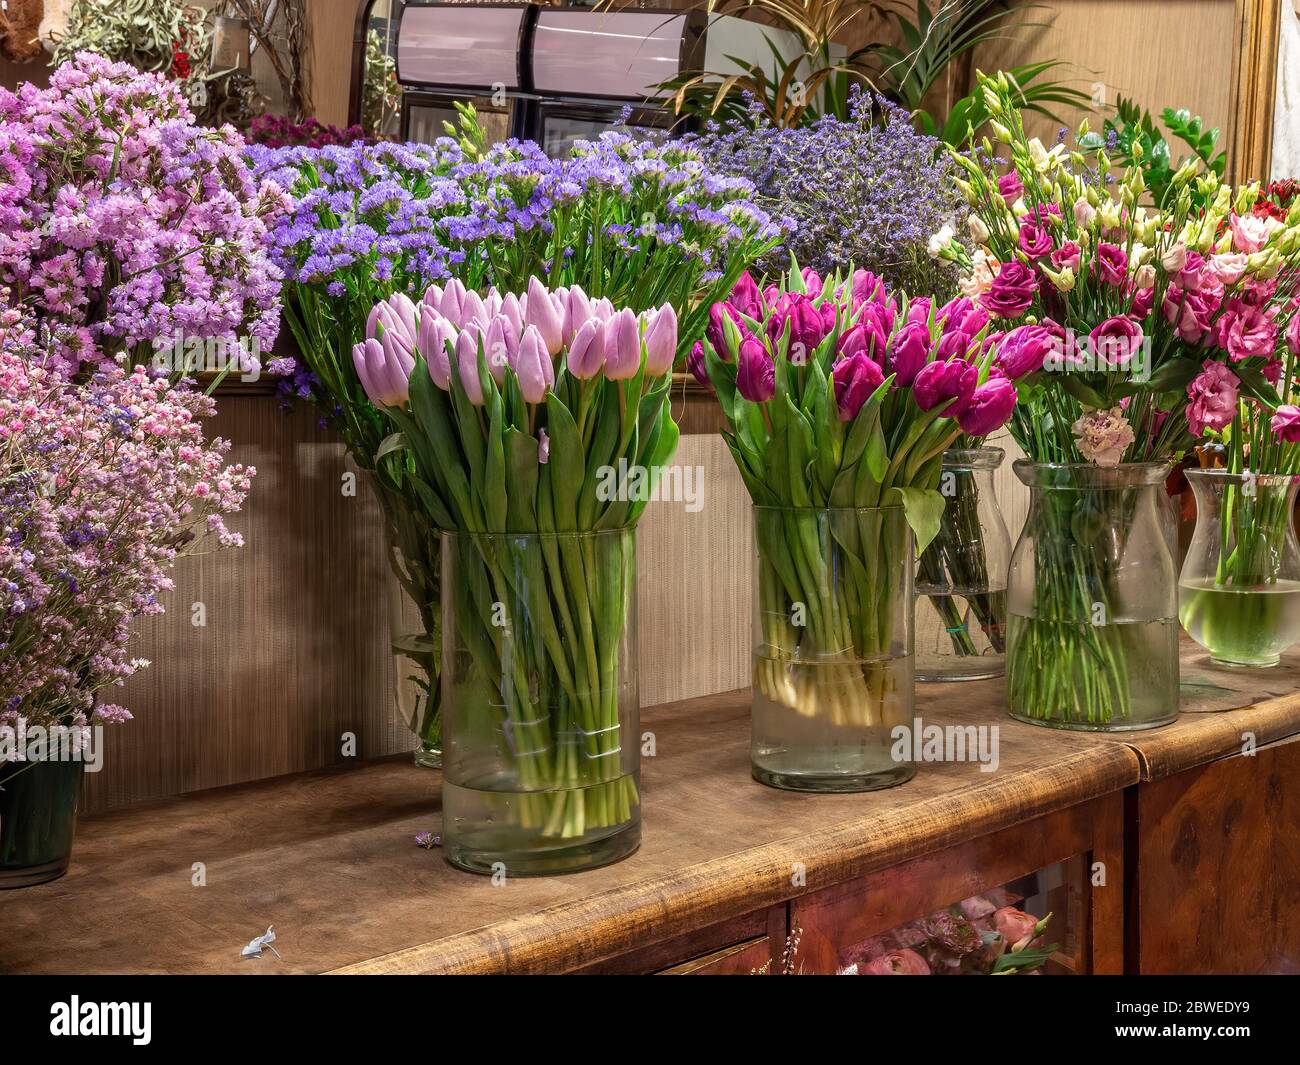 Beautiful colorful flowers for sale, placed in vases in flower shop. Tulips, roses and limonium Stock Photo